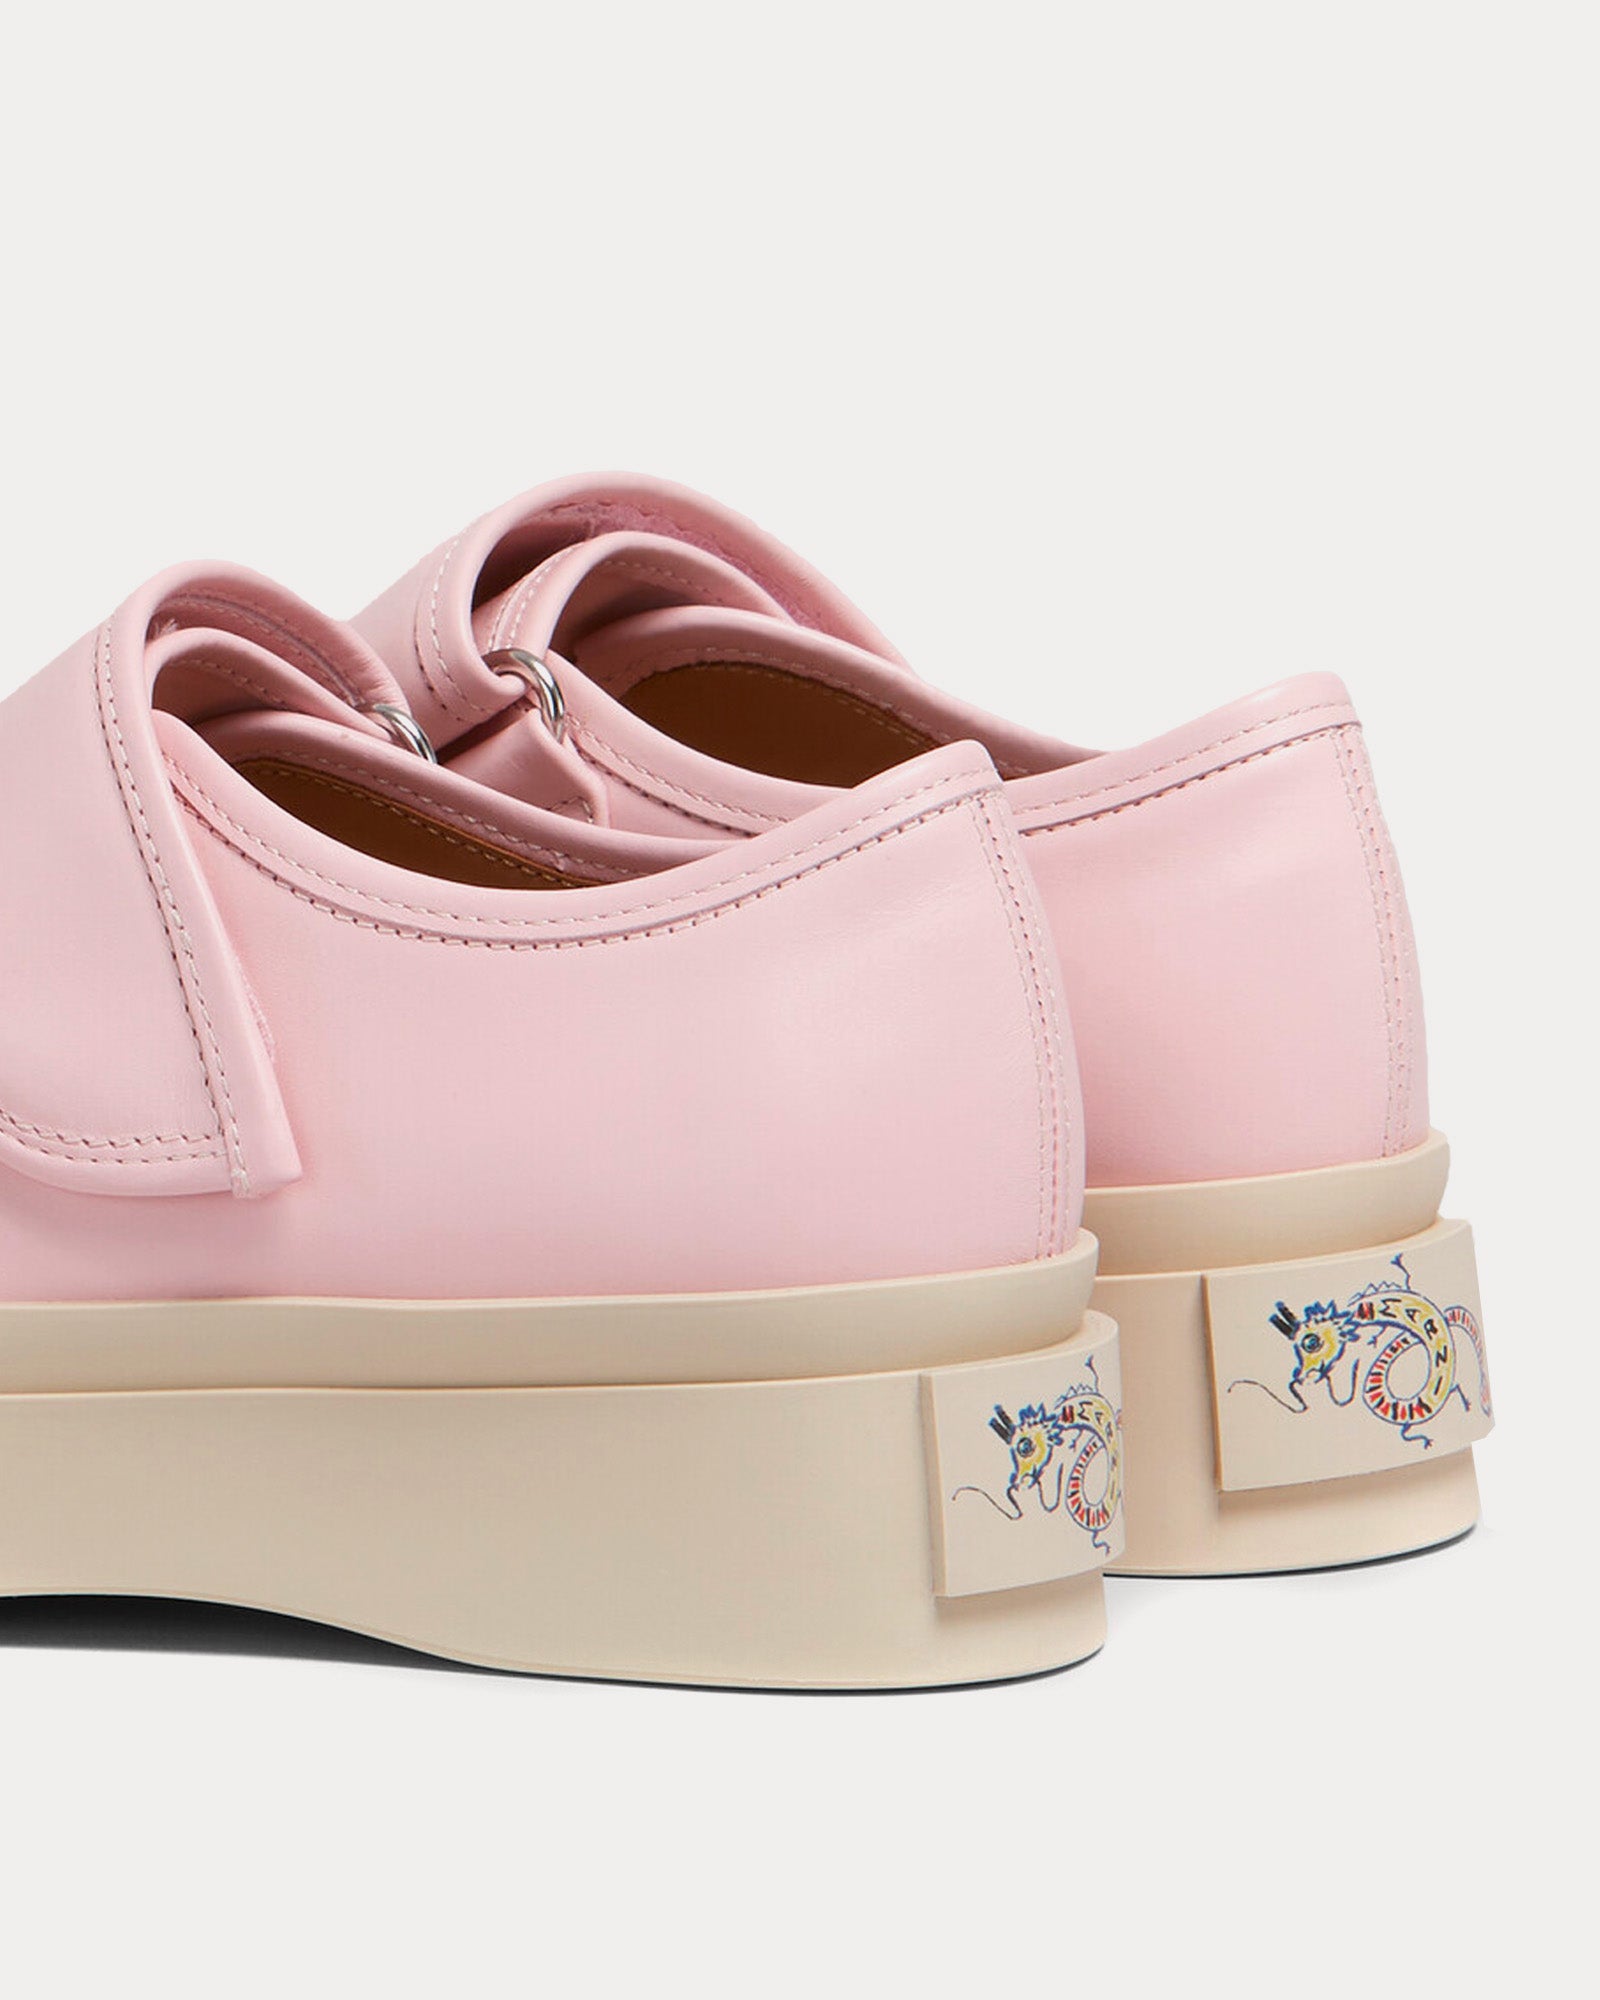 Marni - Mary Jane Leather Light Pink Slip On Sneakers